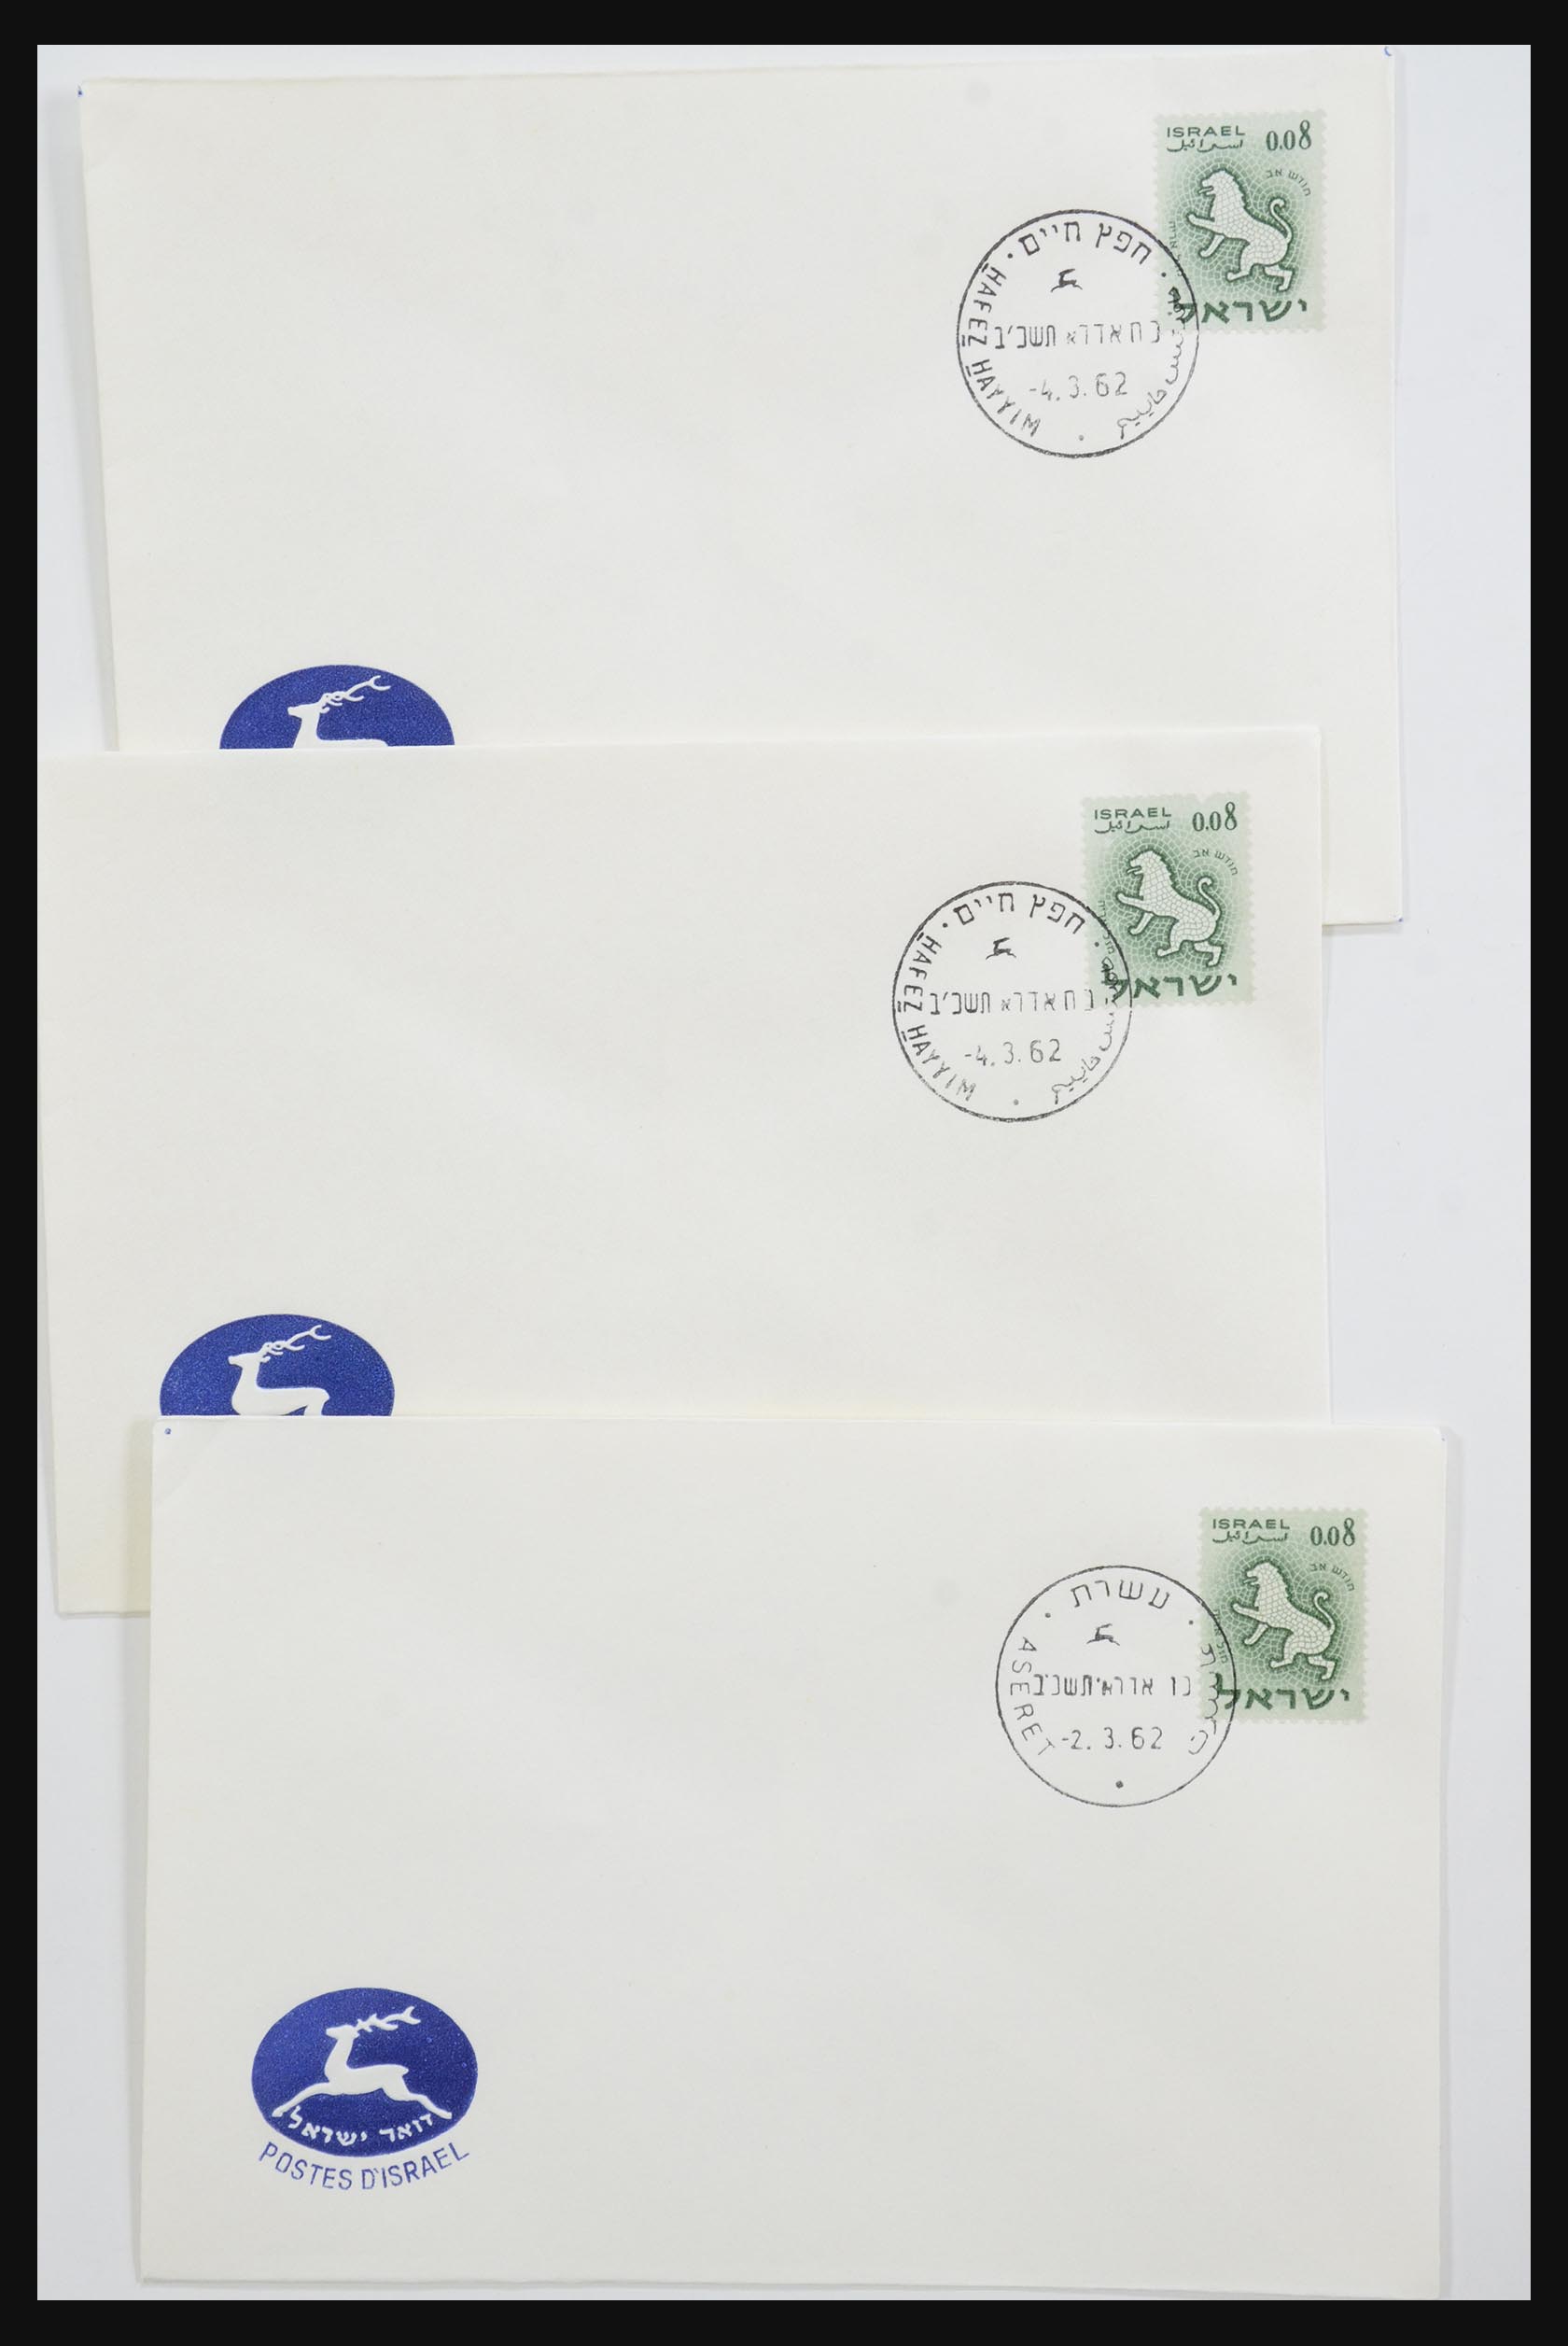 31924 043 - 31924 Israel first day cover collection 1957-2003.